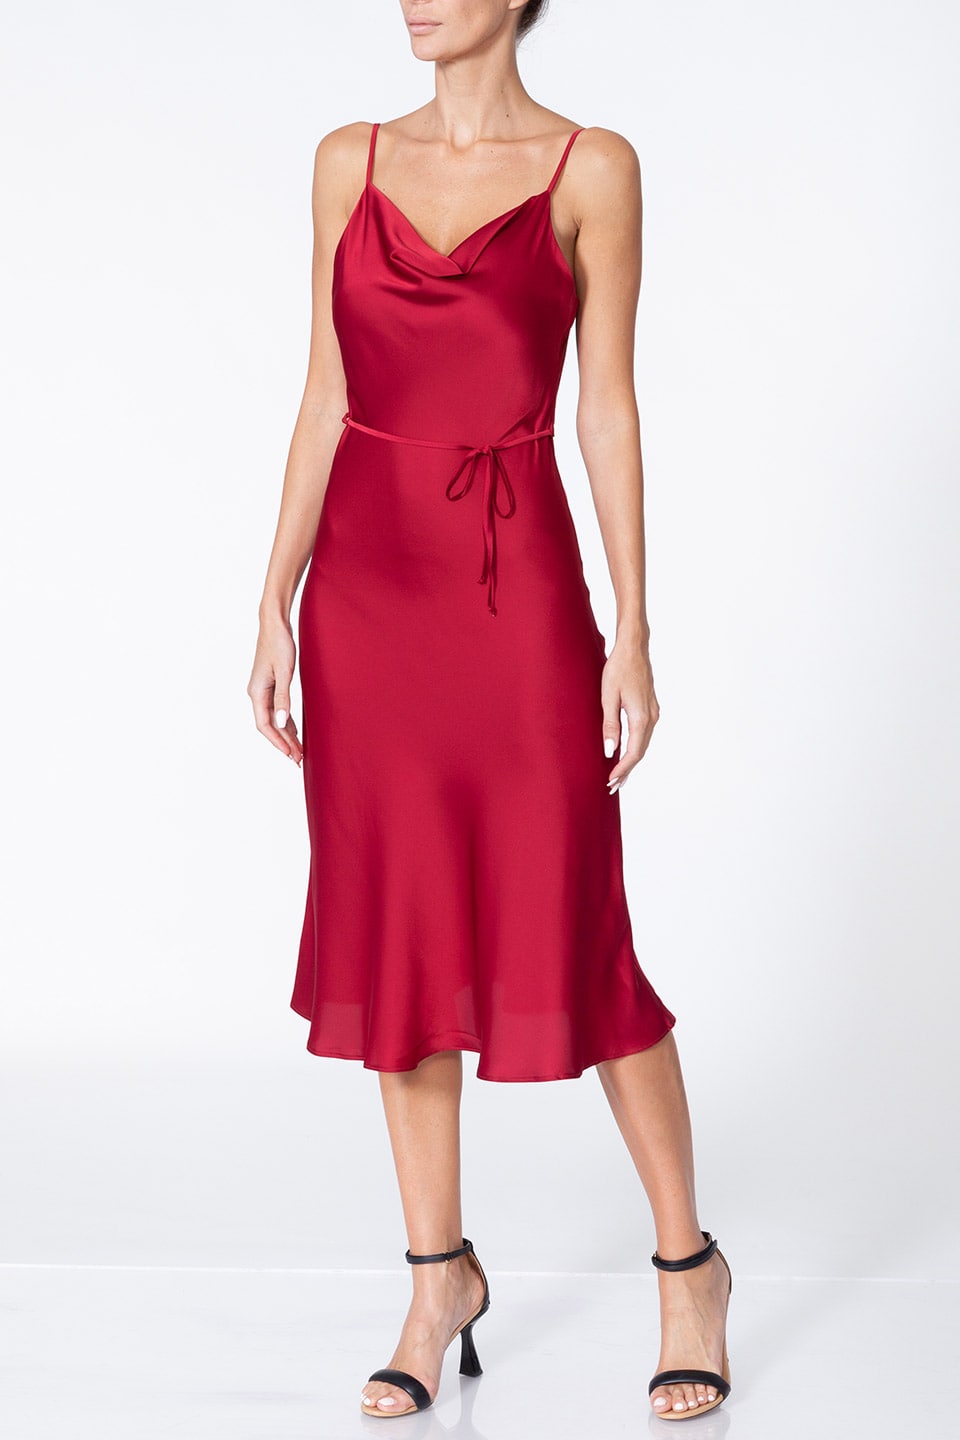 Thumbnail for Product gallery 1, Fashion stylist Midi dress in red available for online shopping. Special occasions dress 